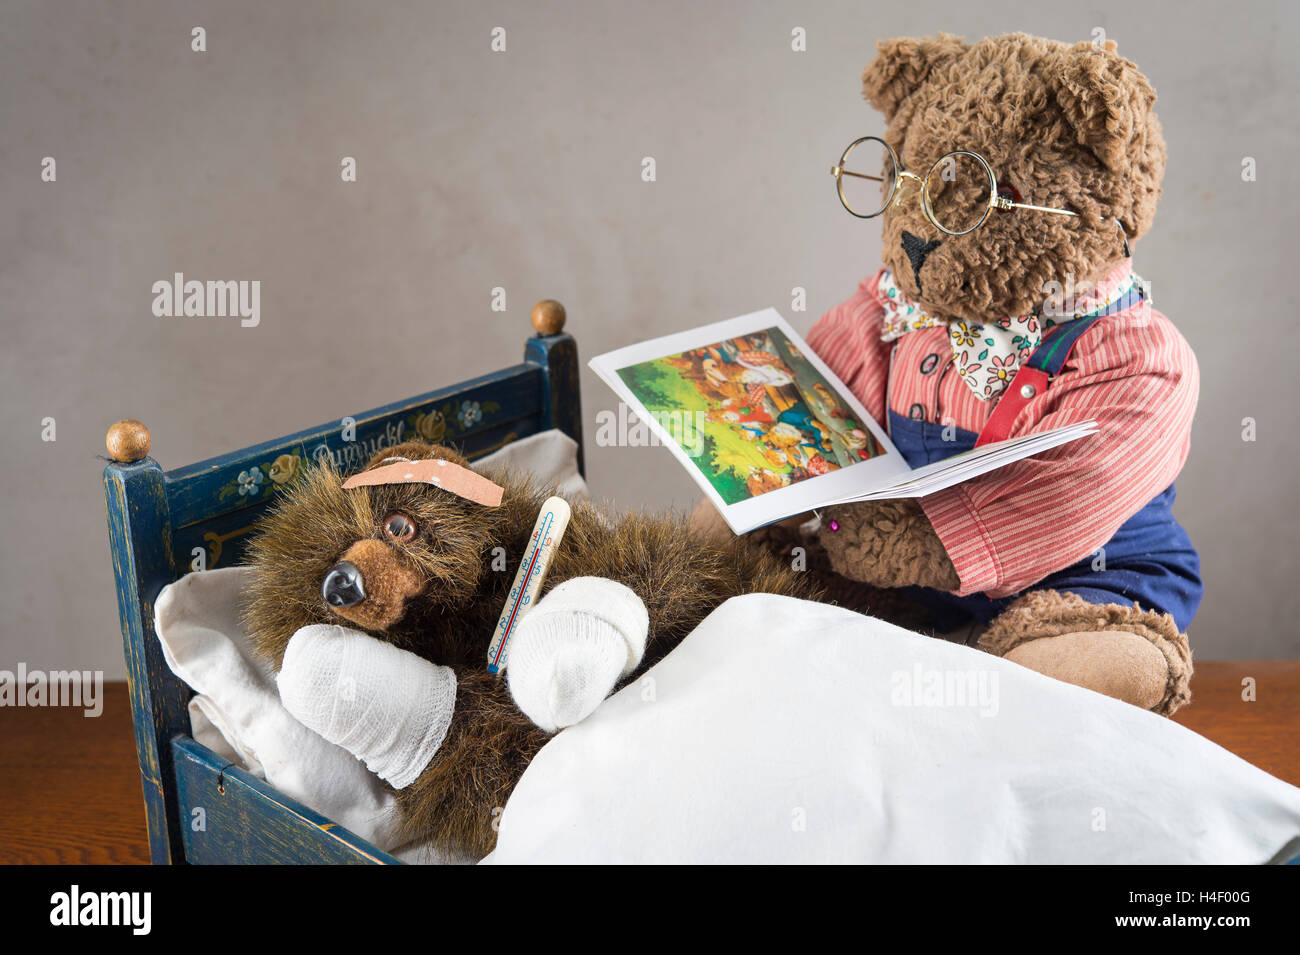 Sick Teddy Bear with bandaged paws and head, holding thermometer, in an original Pumuckl crib, Big Teddy Bear with glasses and Stock Photo